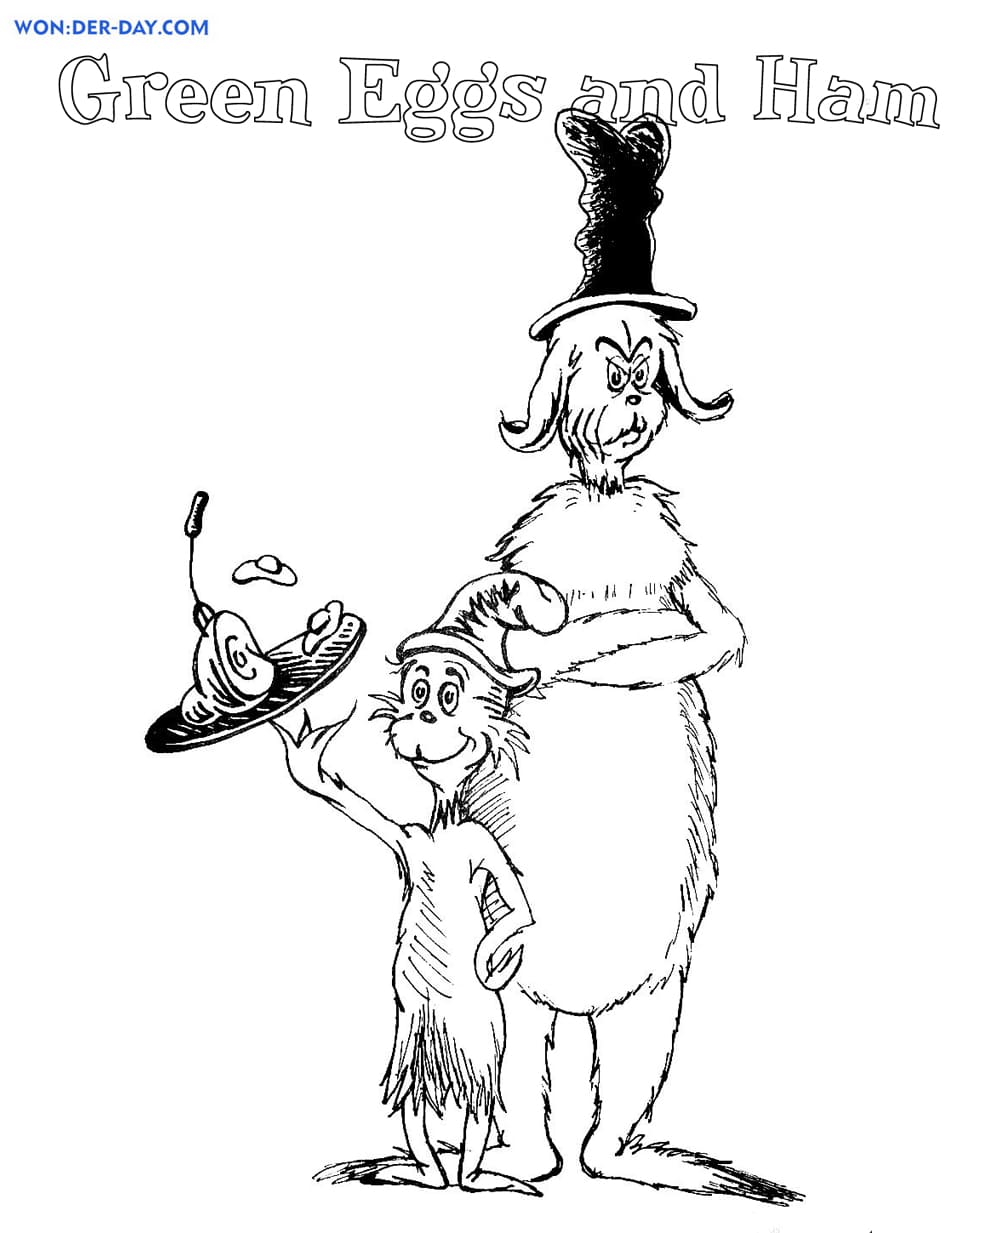 Green eggs and ham coloring pages wonder day â coloring pages for children and adults